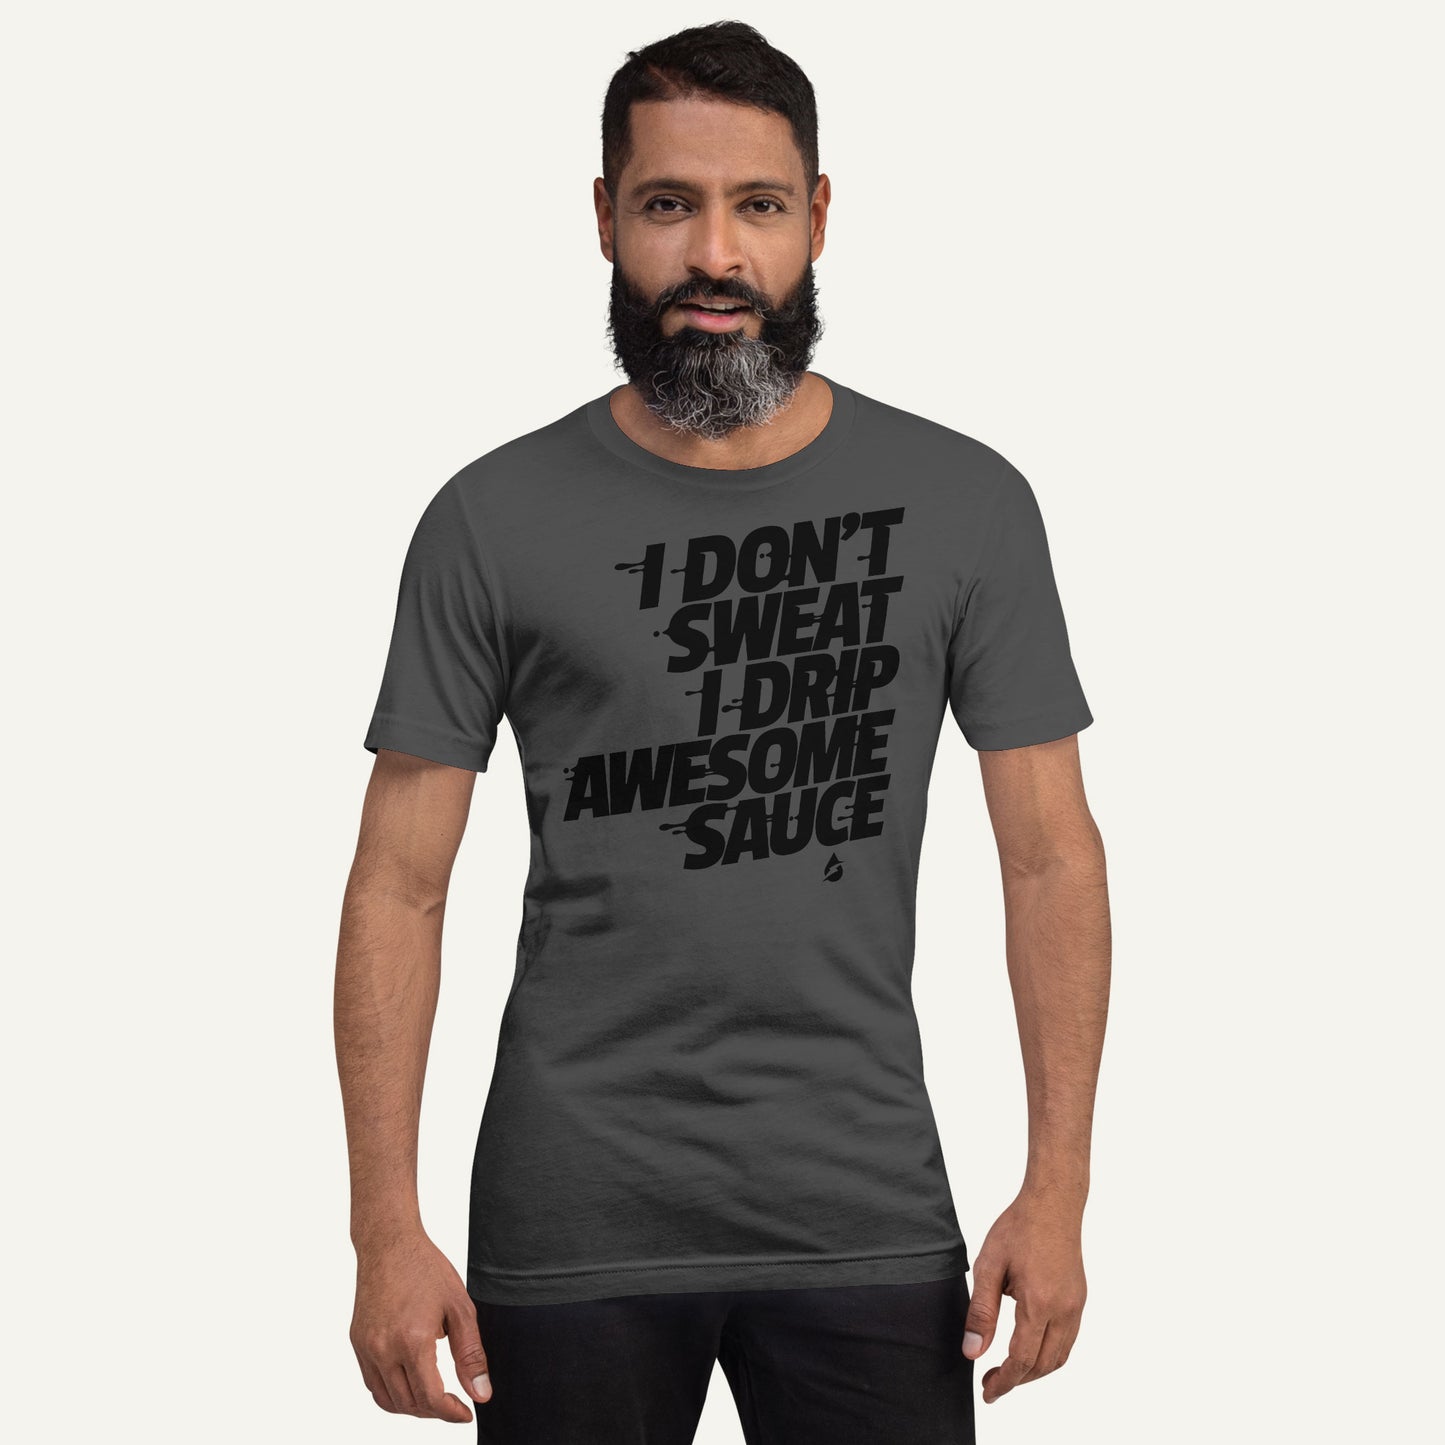 I Don't Sweat I Drip Awesome Sauce Men's Standard T-Shirt